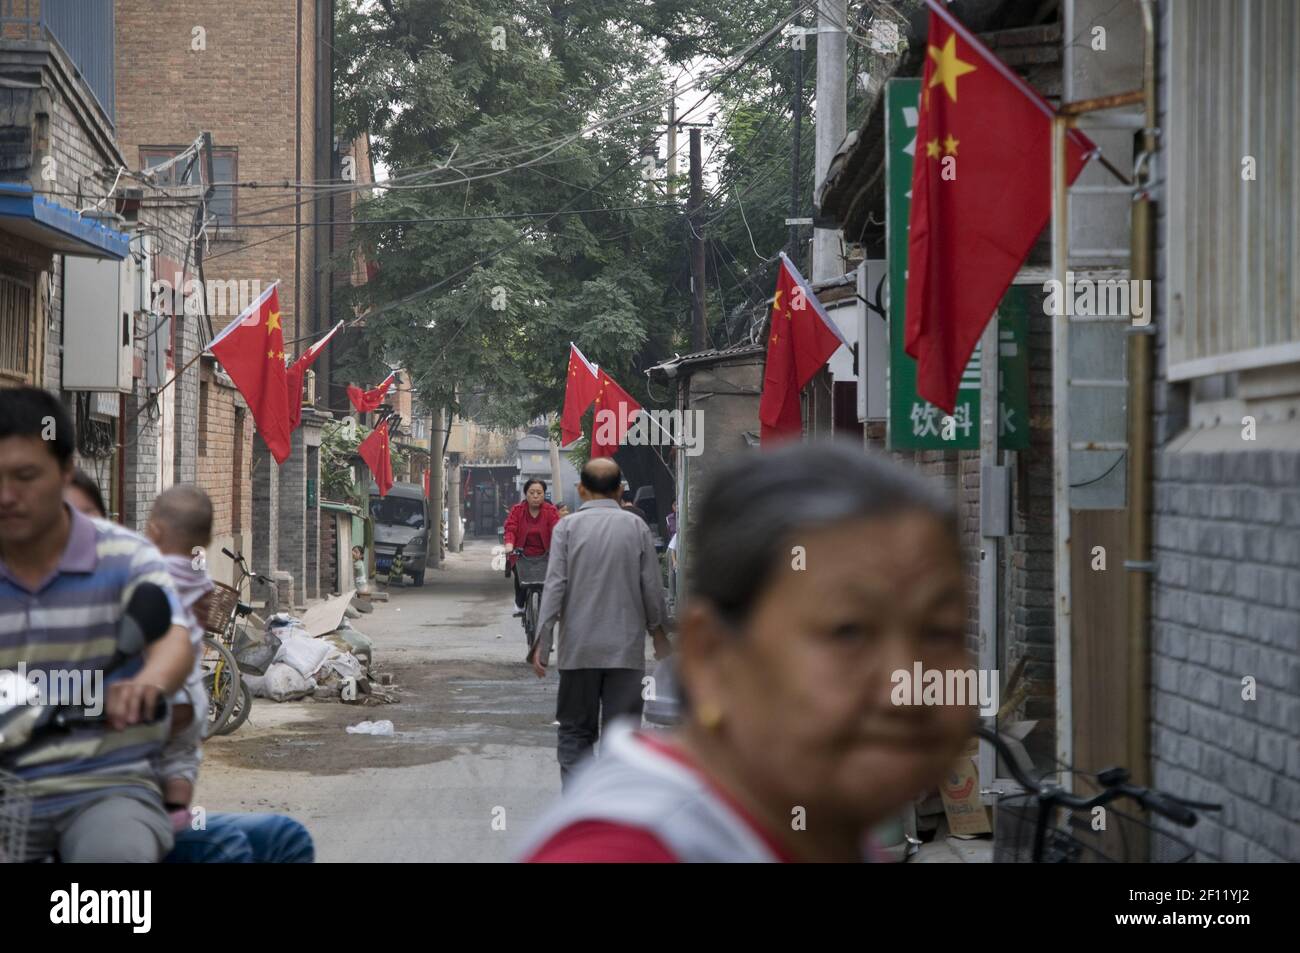 Chinese flags in a Beijing hutong (popular and historic area). (Photo by Raphael Fournier/Sipa USA) Stock Photo